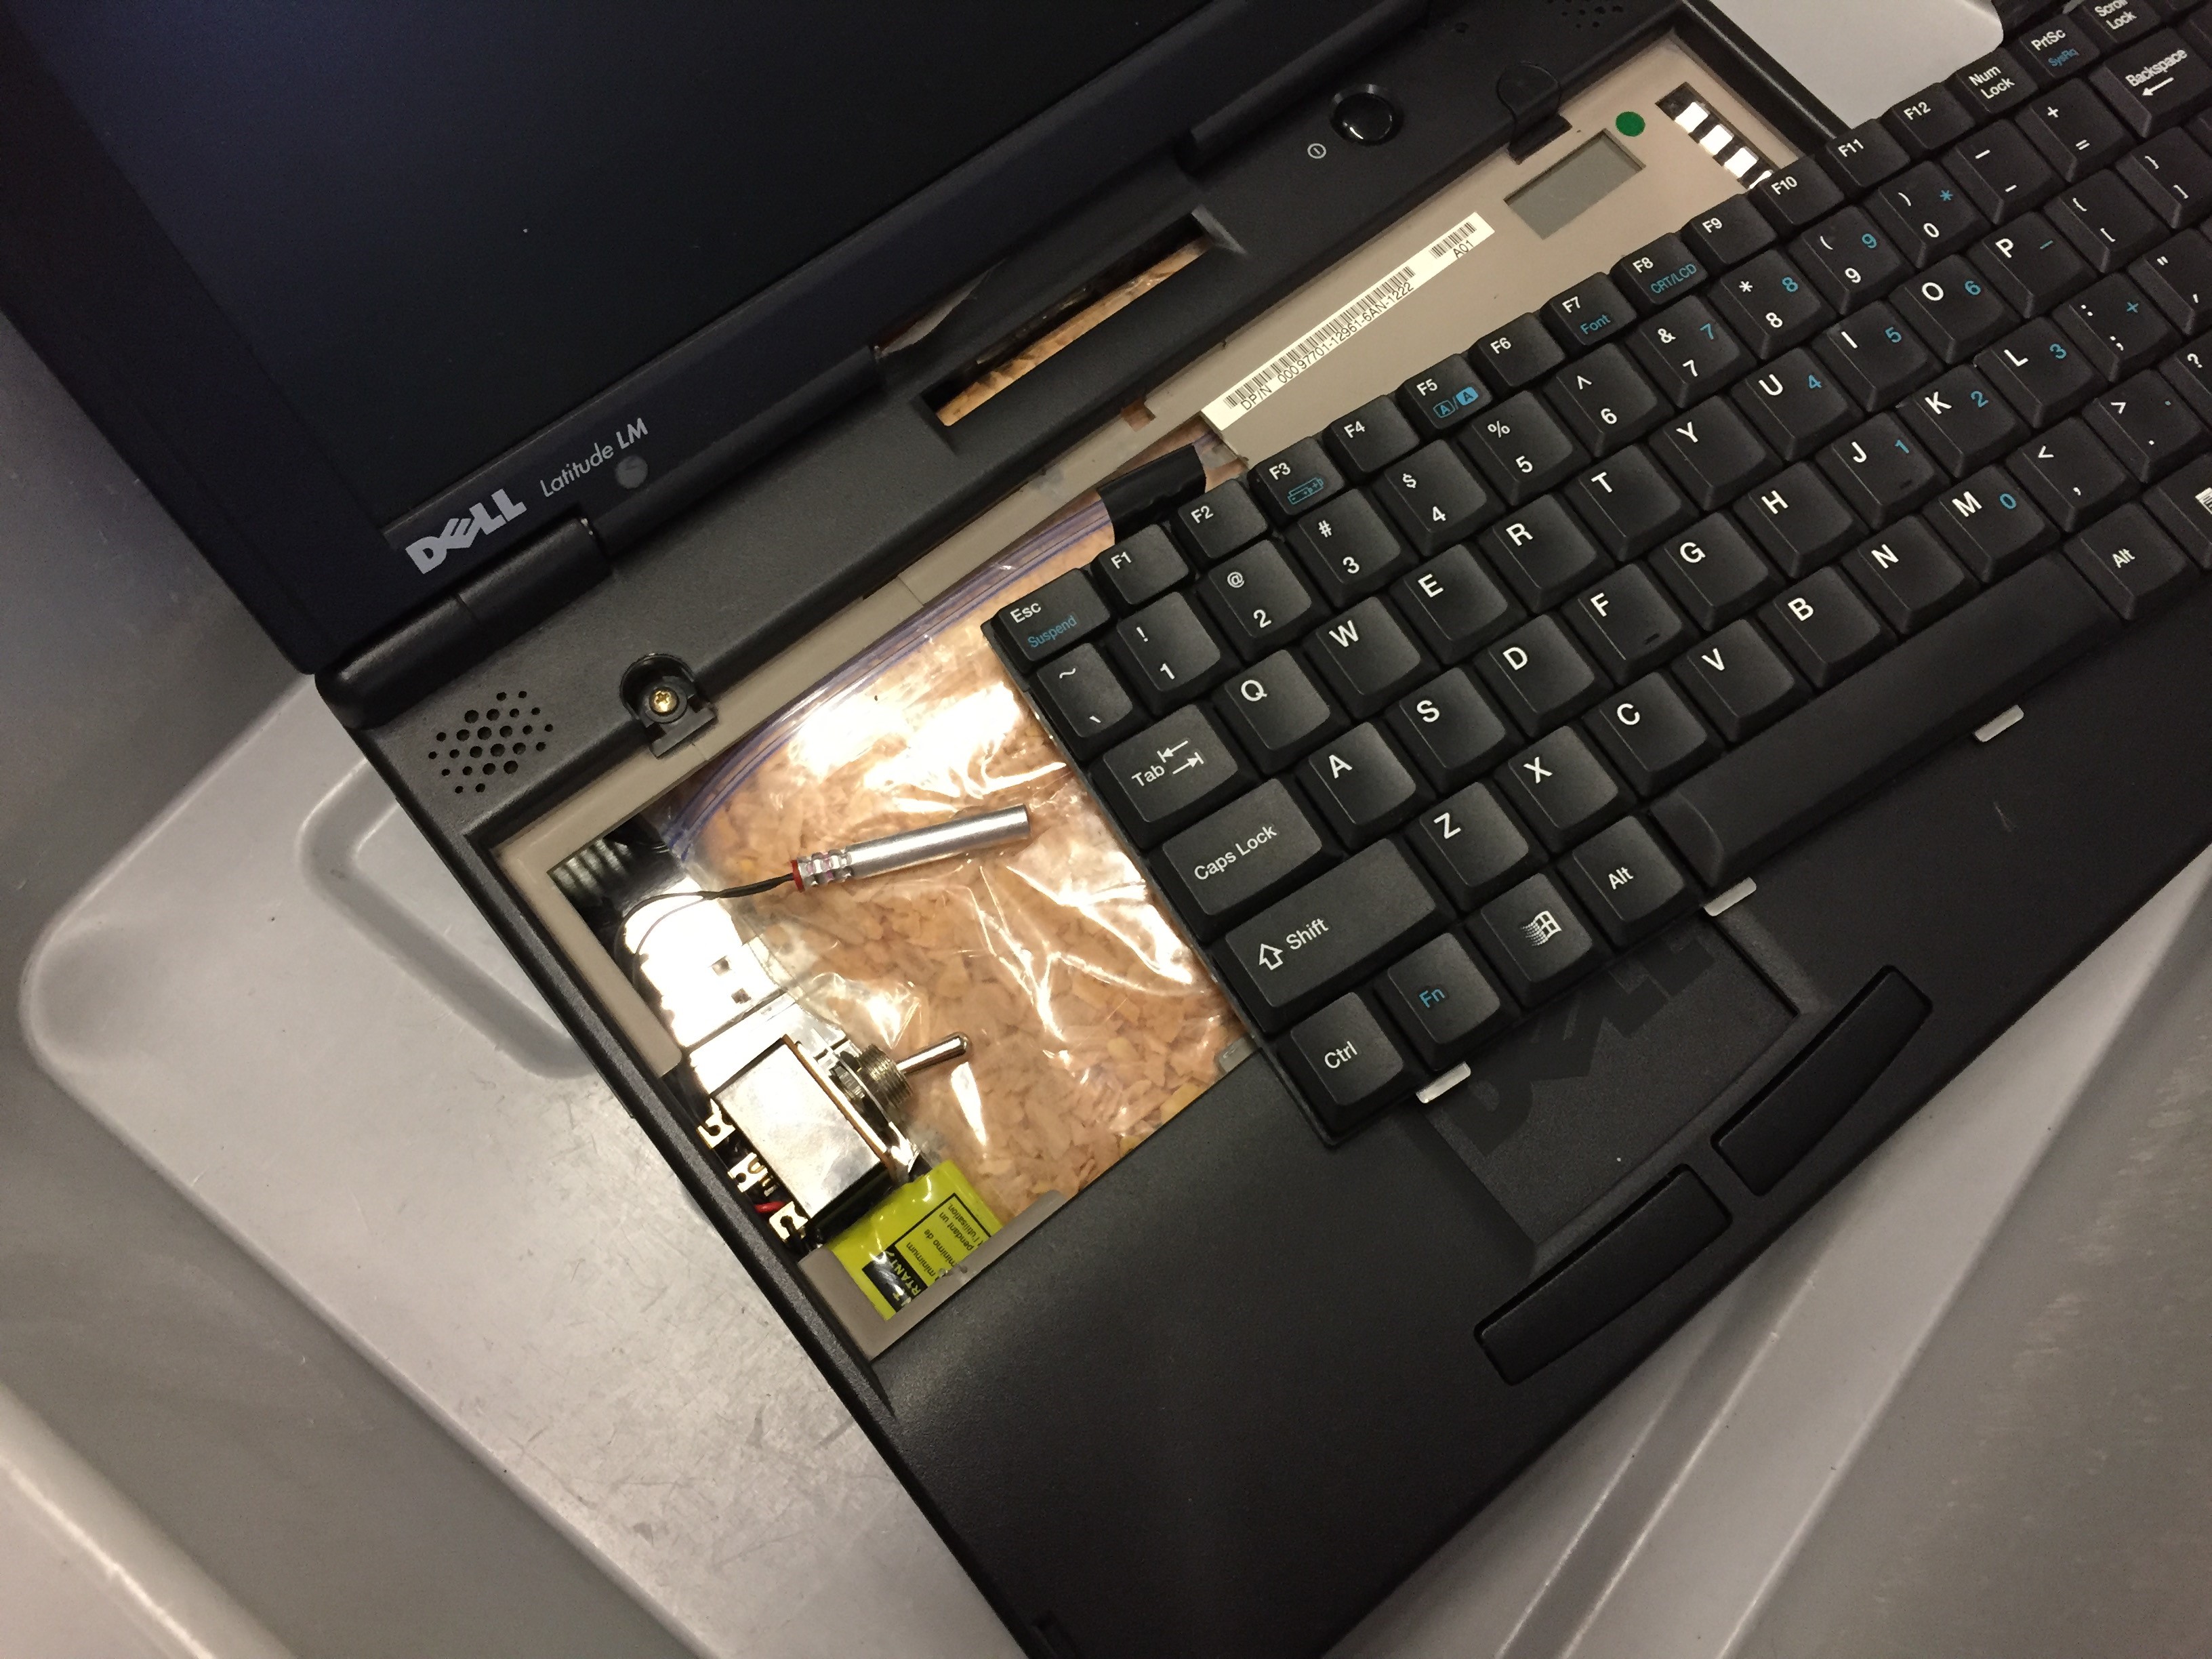 This replica explosive device was concealed inside of a laptop. This device is used as a training aid for TSA officers. (TSA photo)